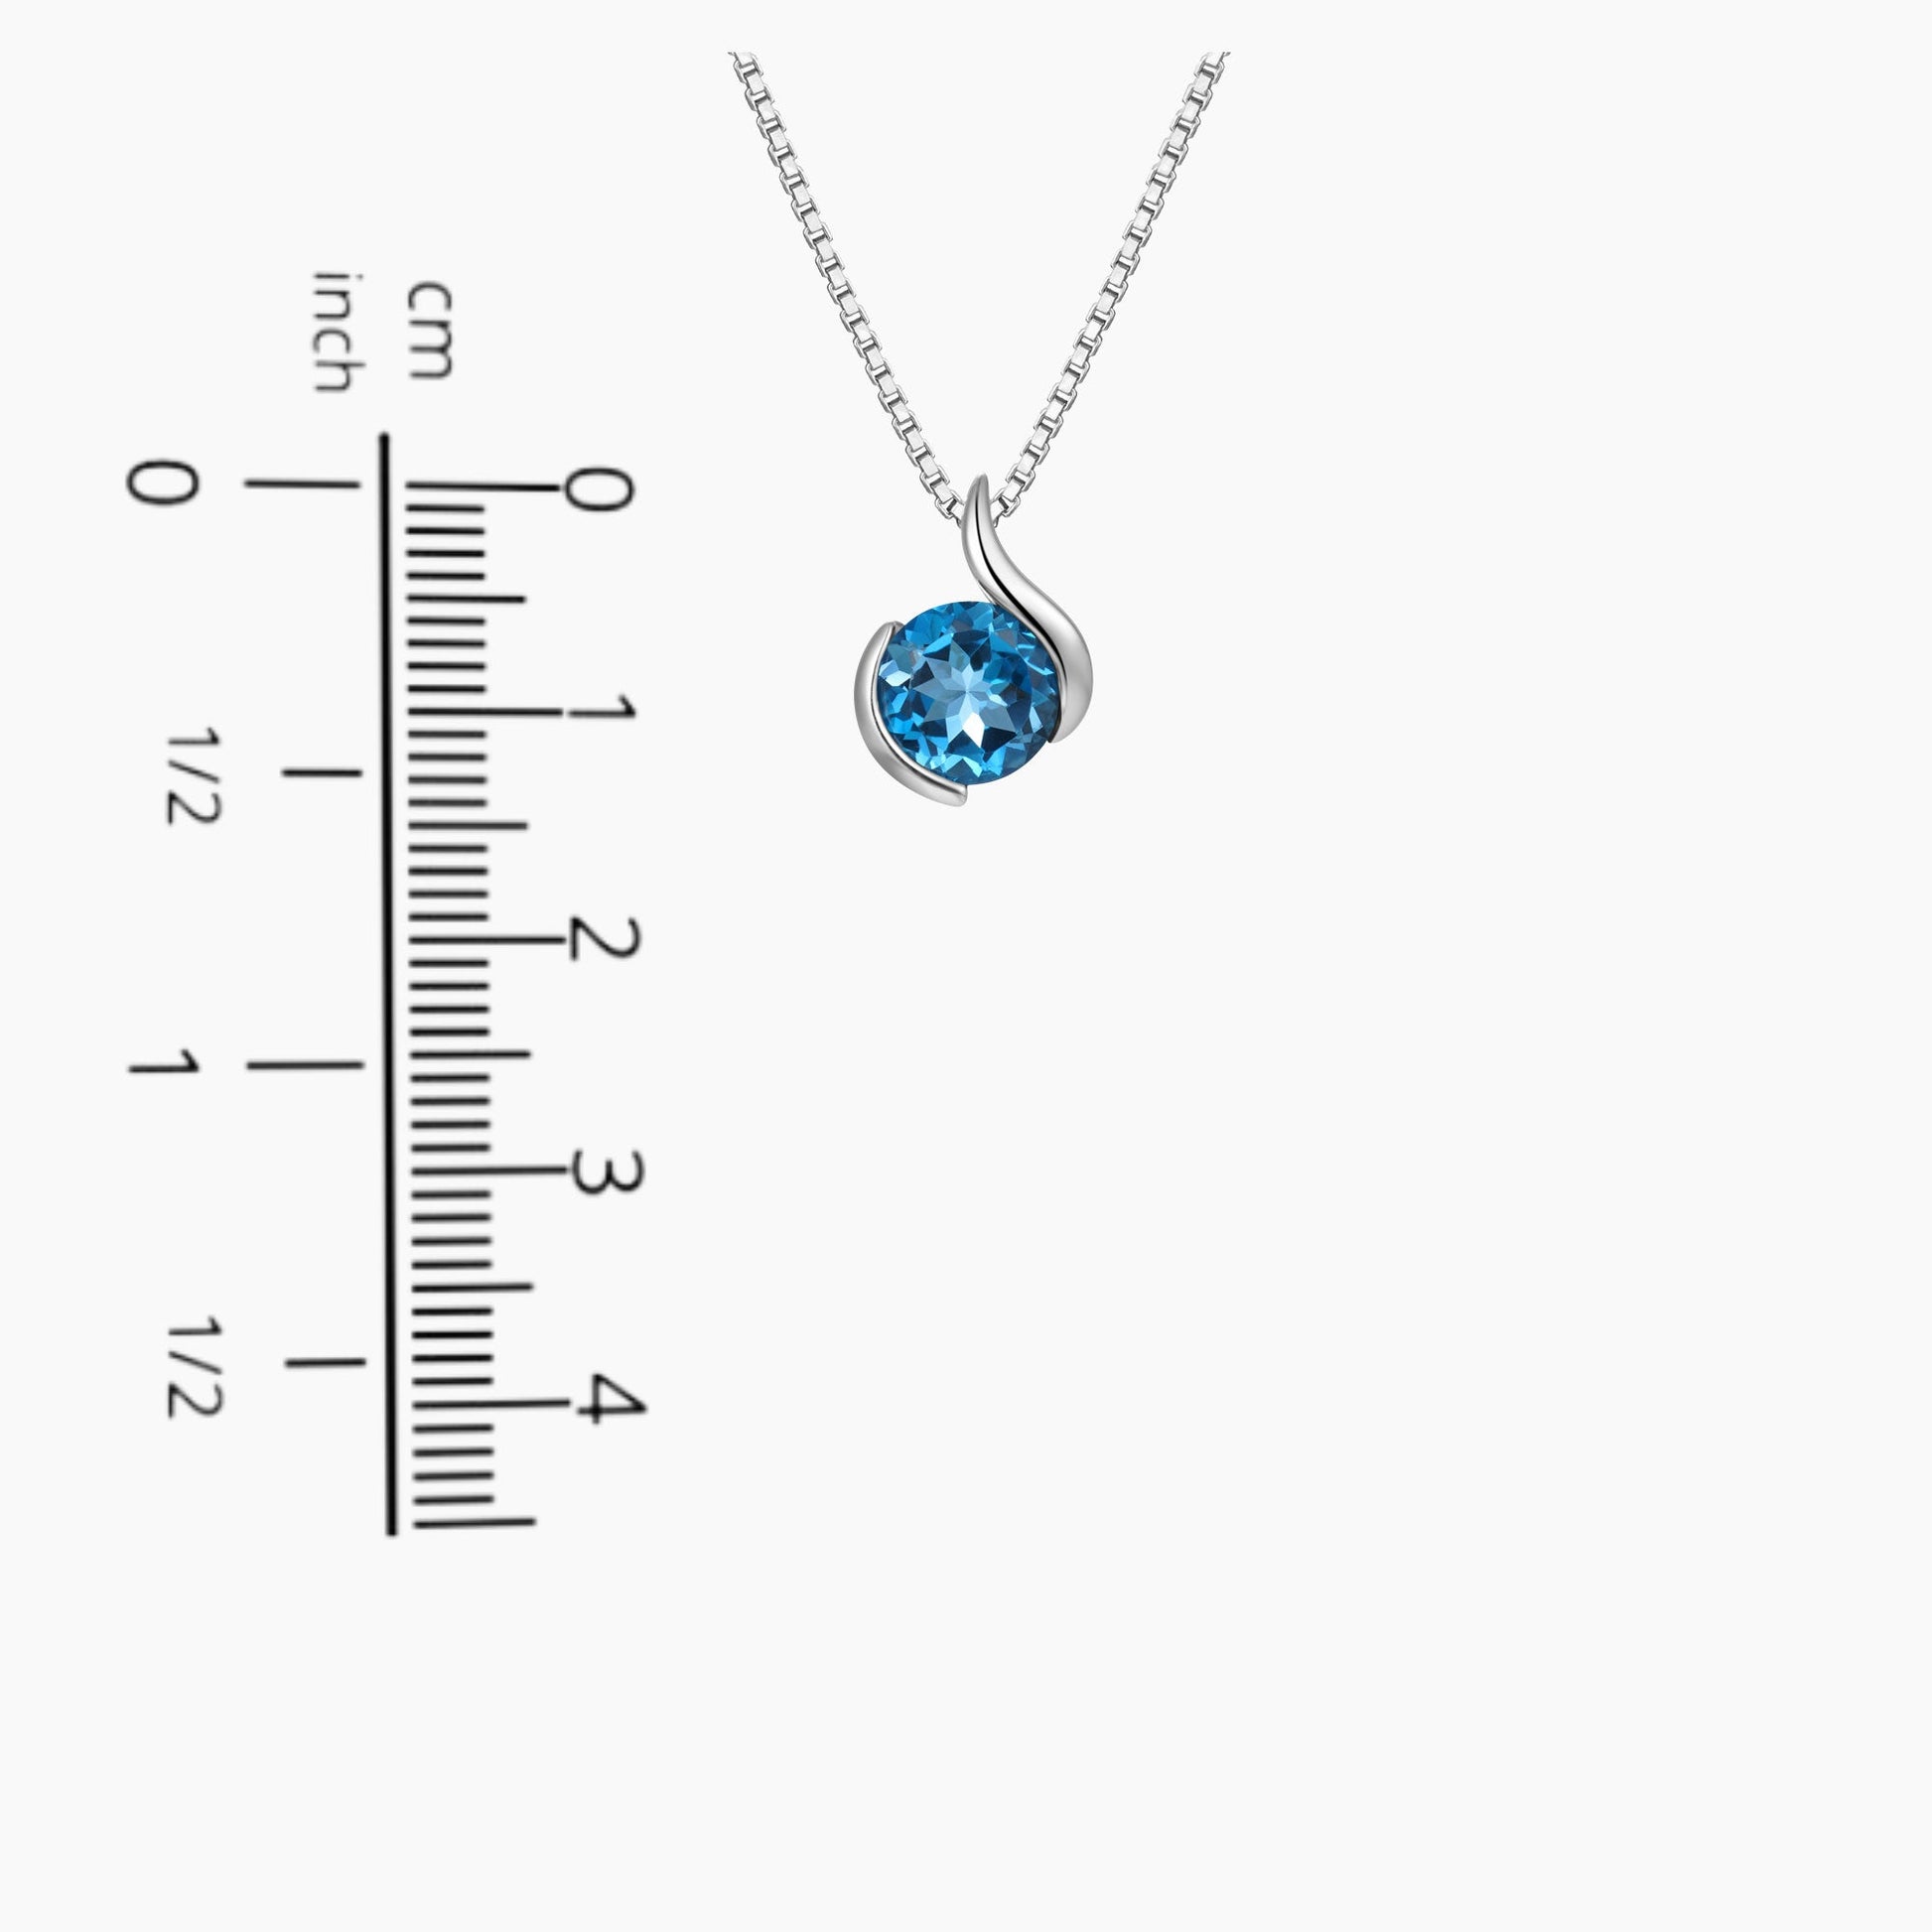 London Blue Topaz Monarch Pendant displayed next to a scale for size comparison